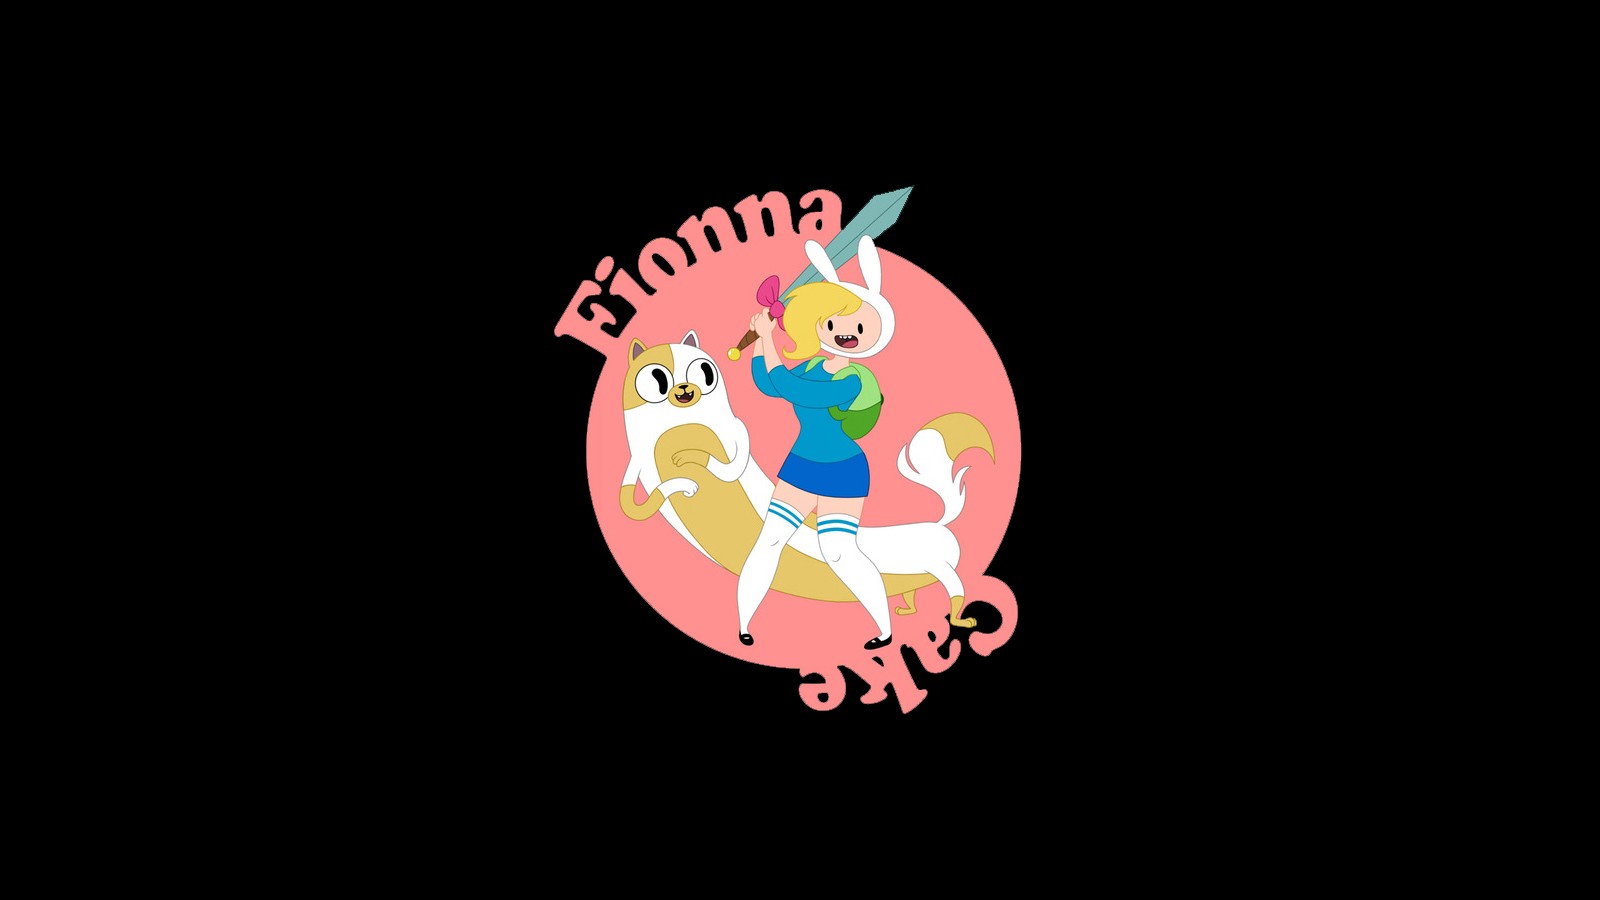 General 1600x900 Fionna the Human cartoon simple background black background